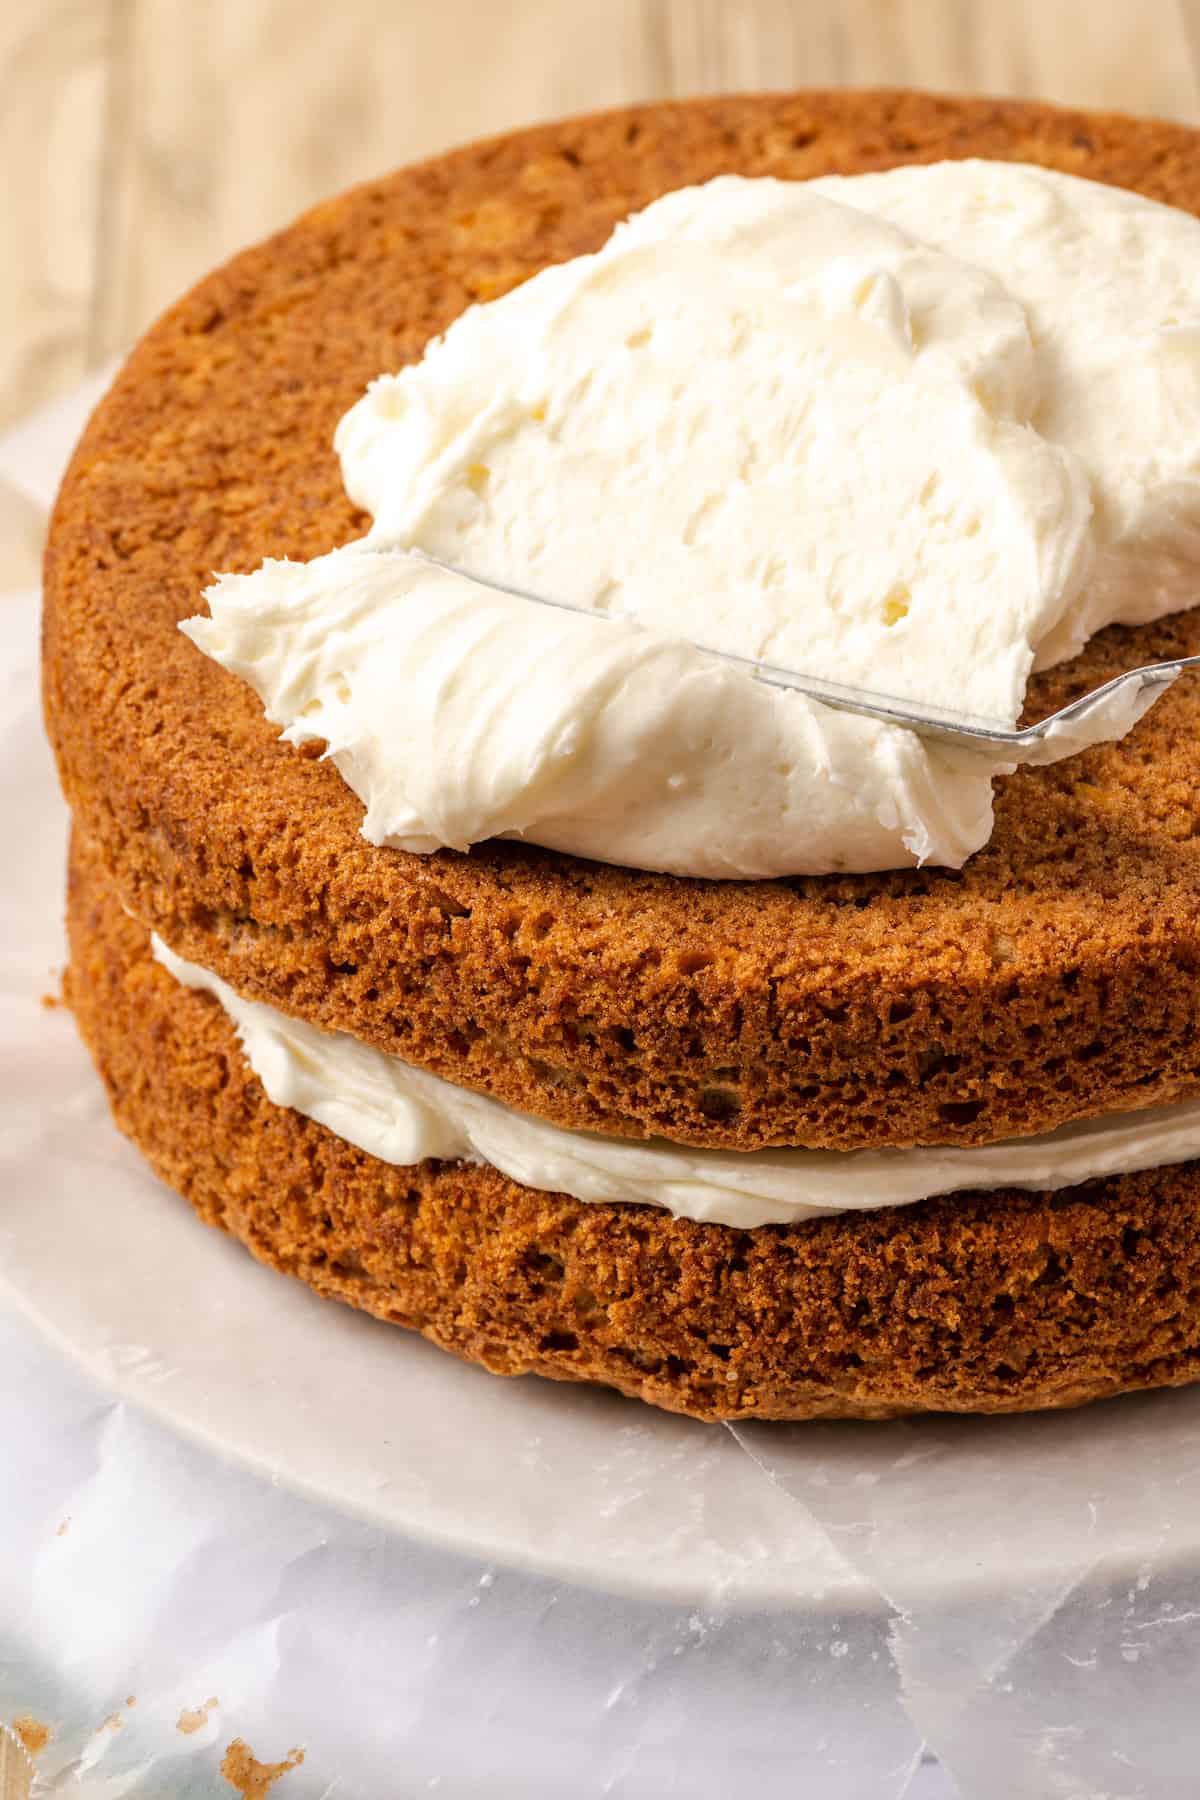 A dollop of frosting being spread over the second layer of a two-layer gluten-free carrot cake.